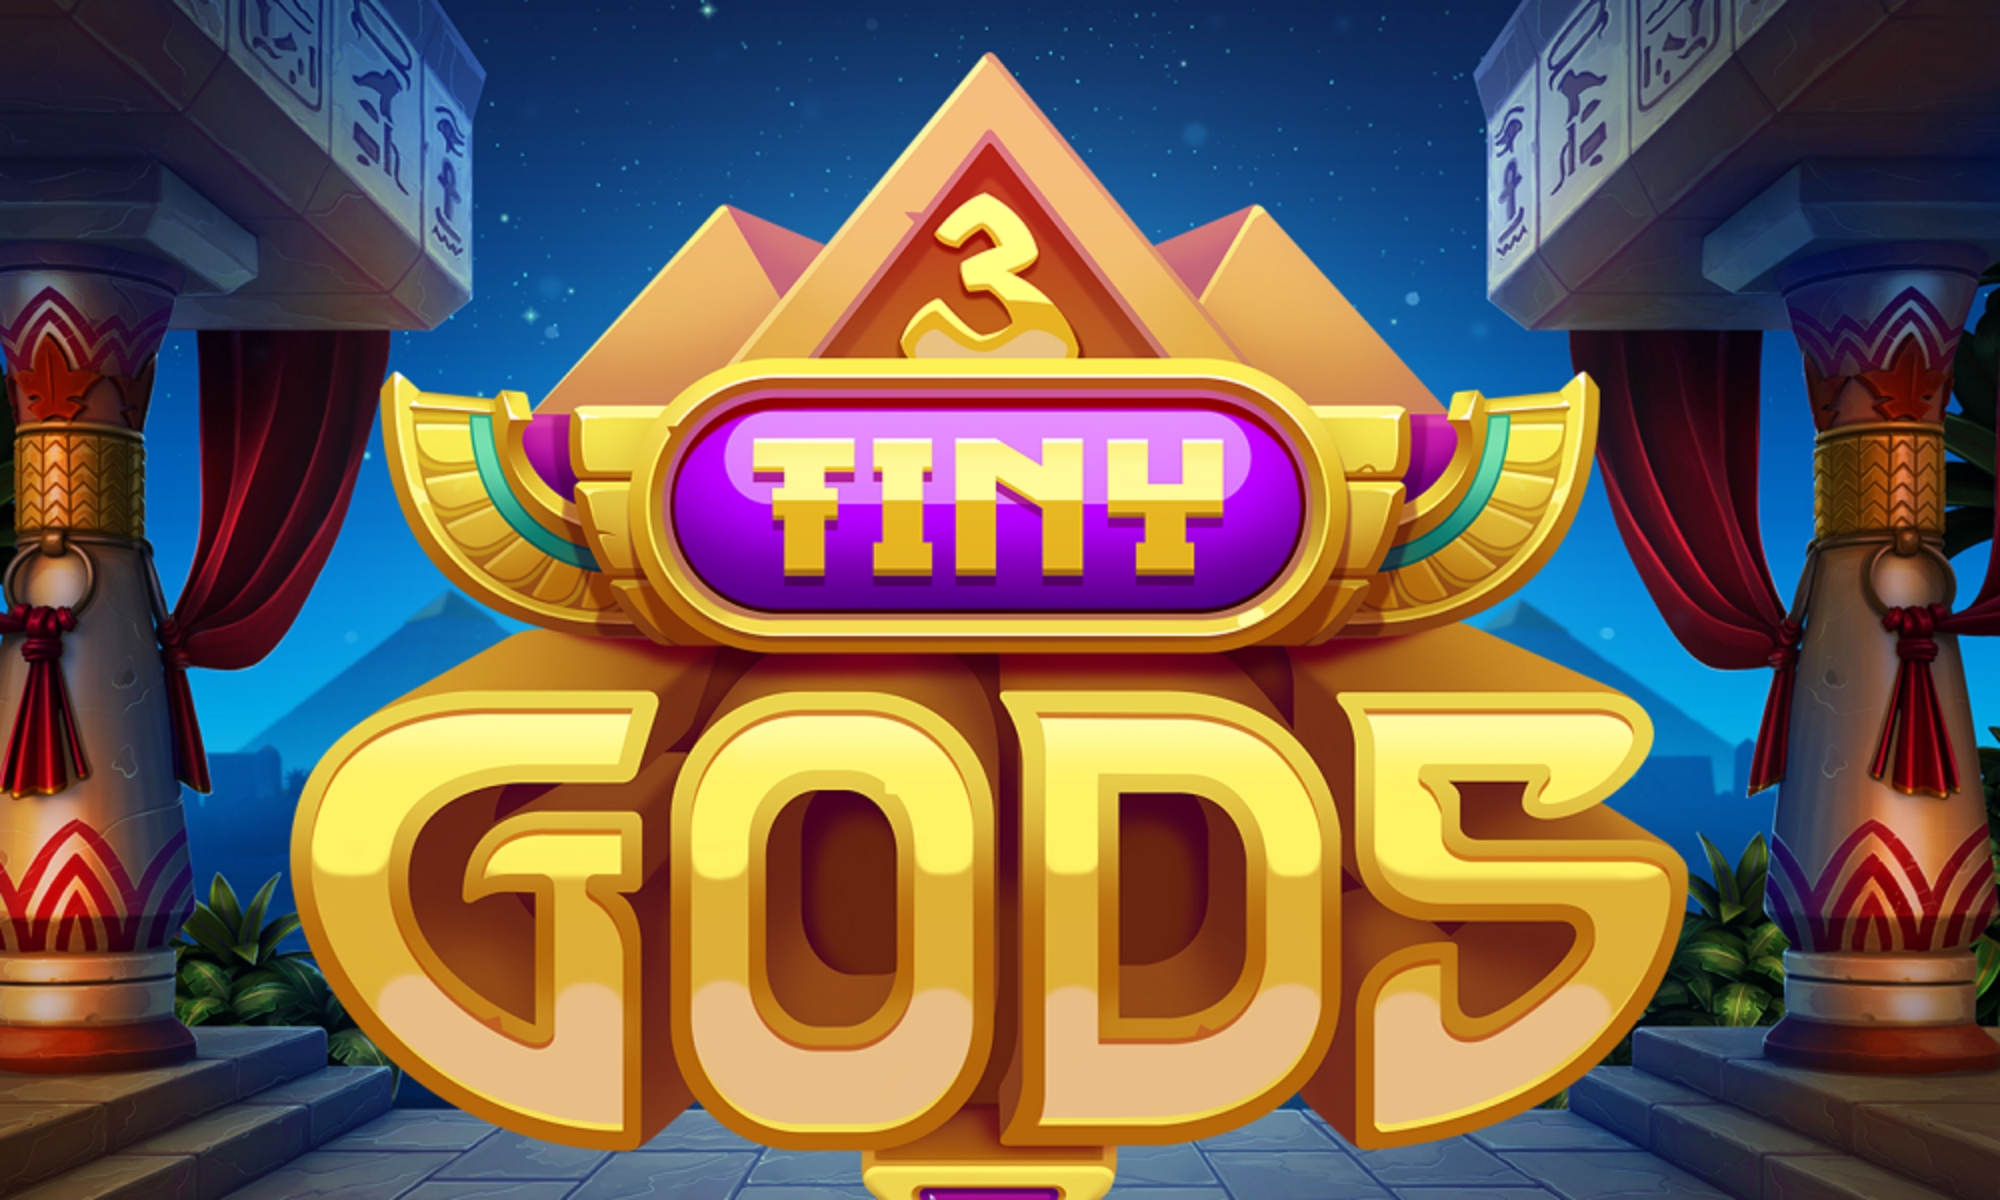 The 3 Tiny Gods Online Slot Demo Game by Foxium